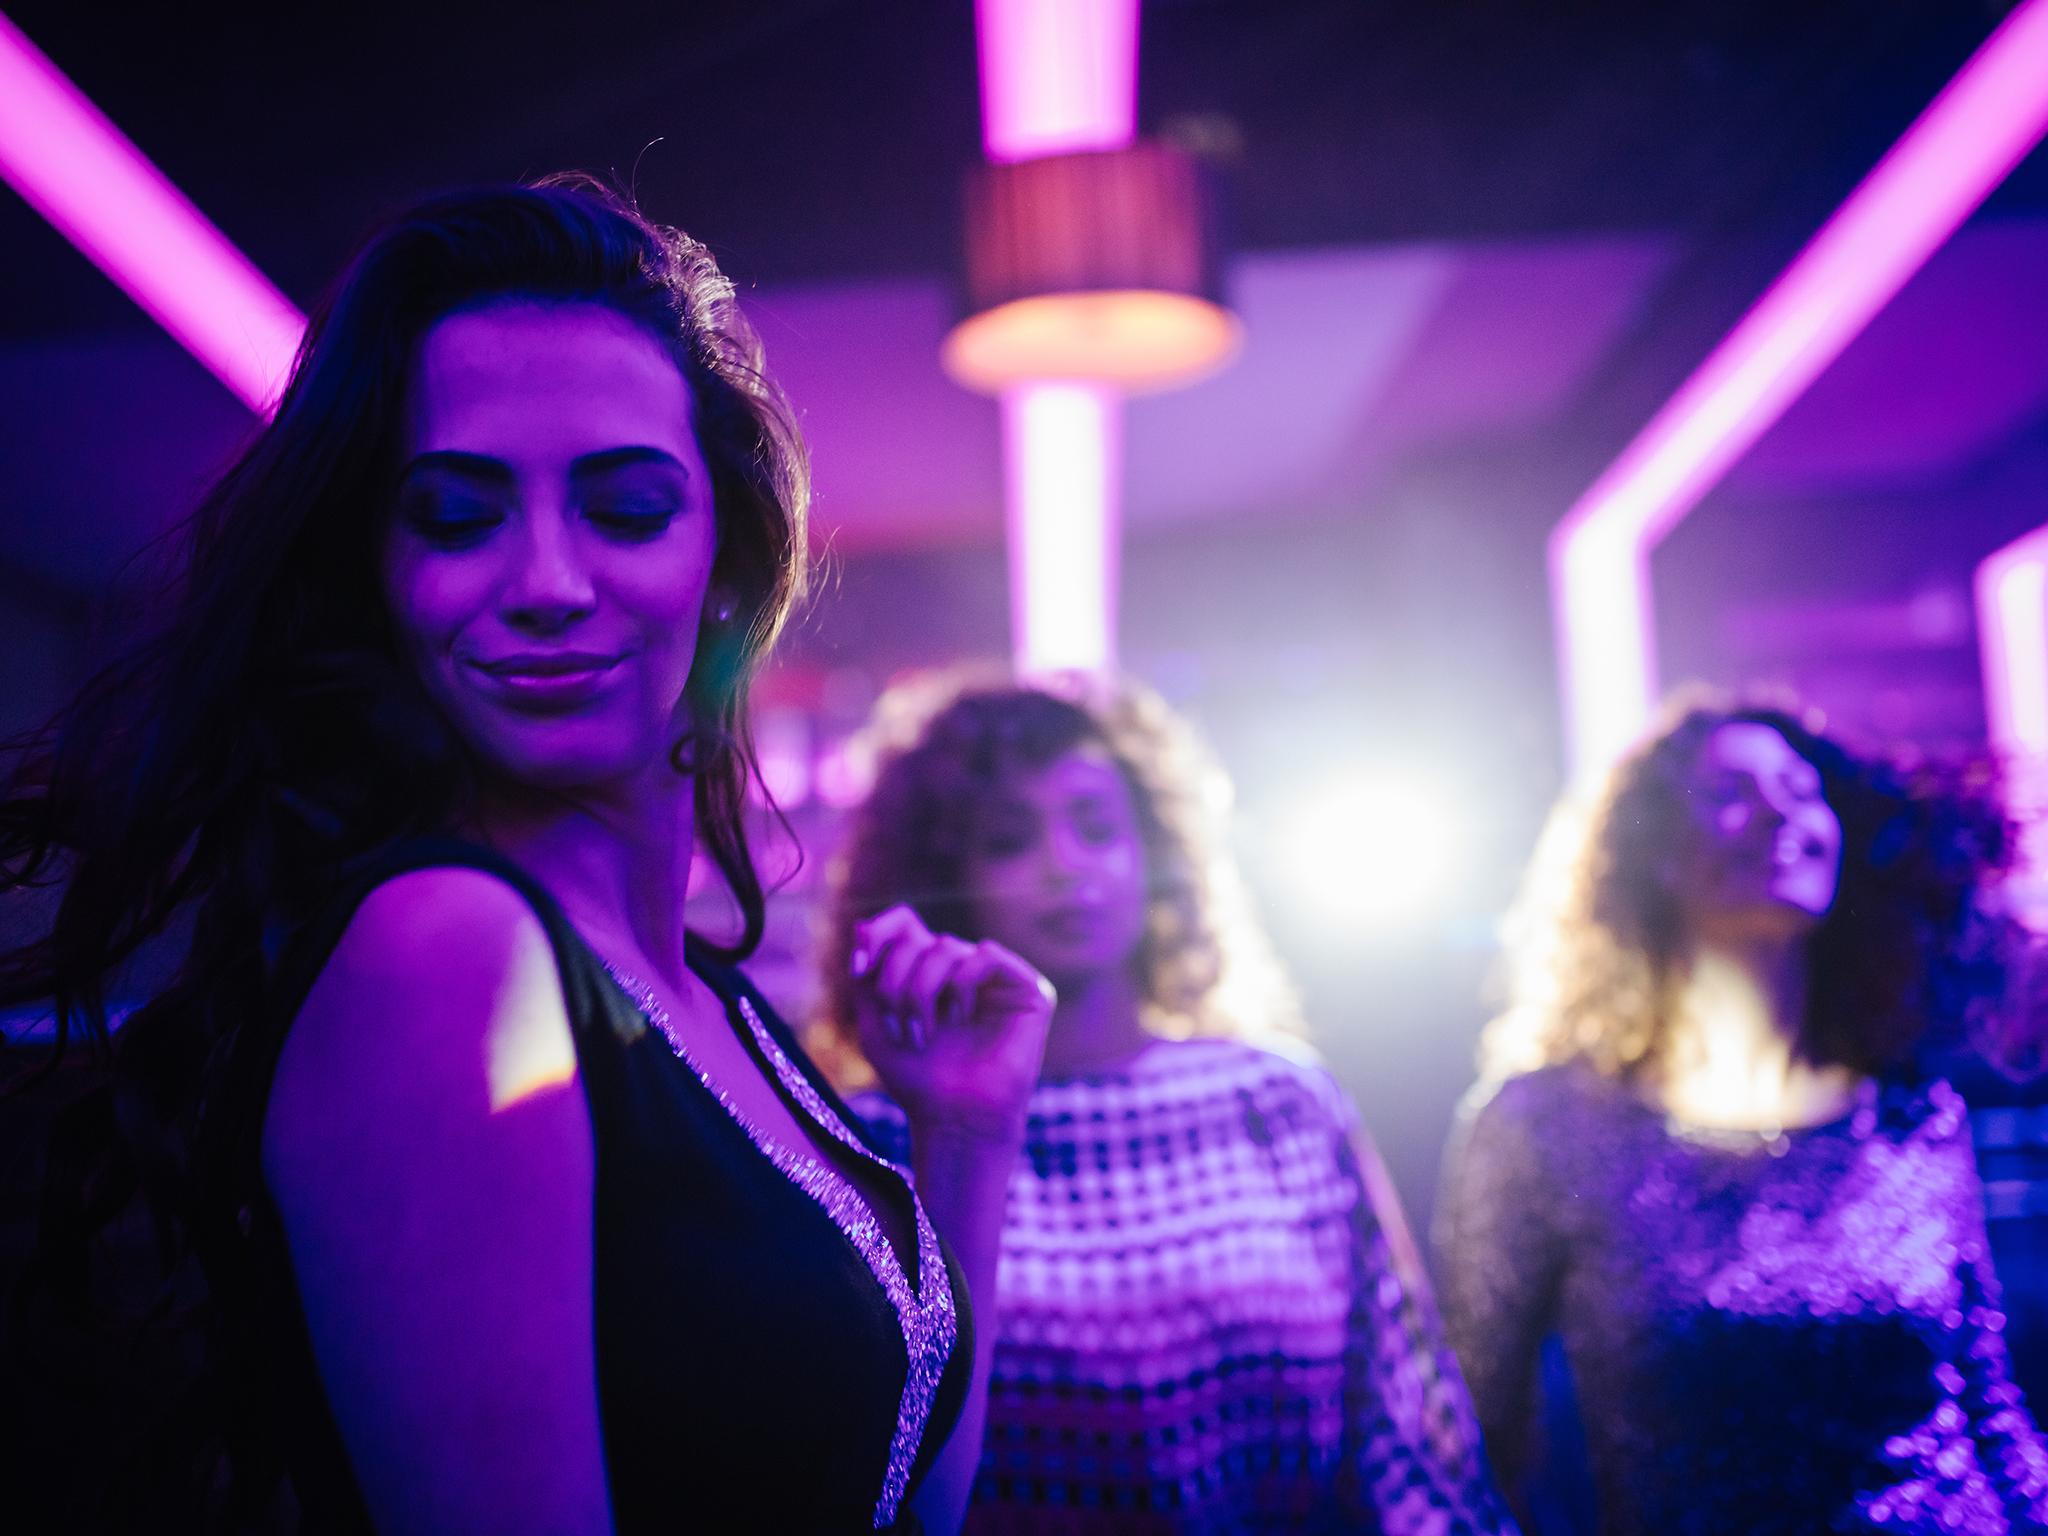 Most women say they expect sexual harassment as part of a night out